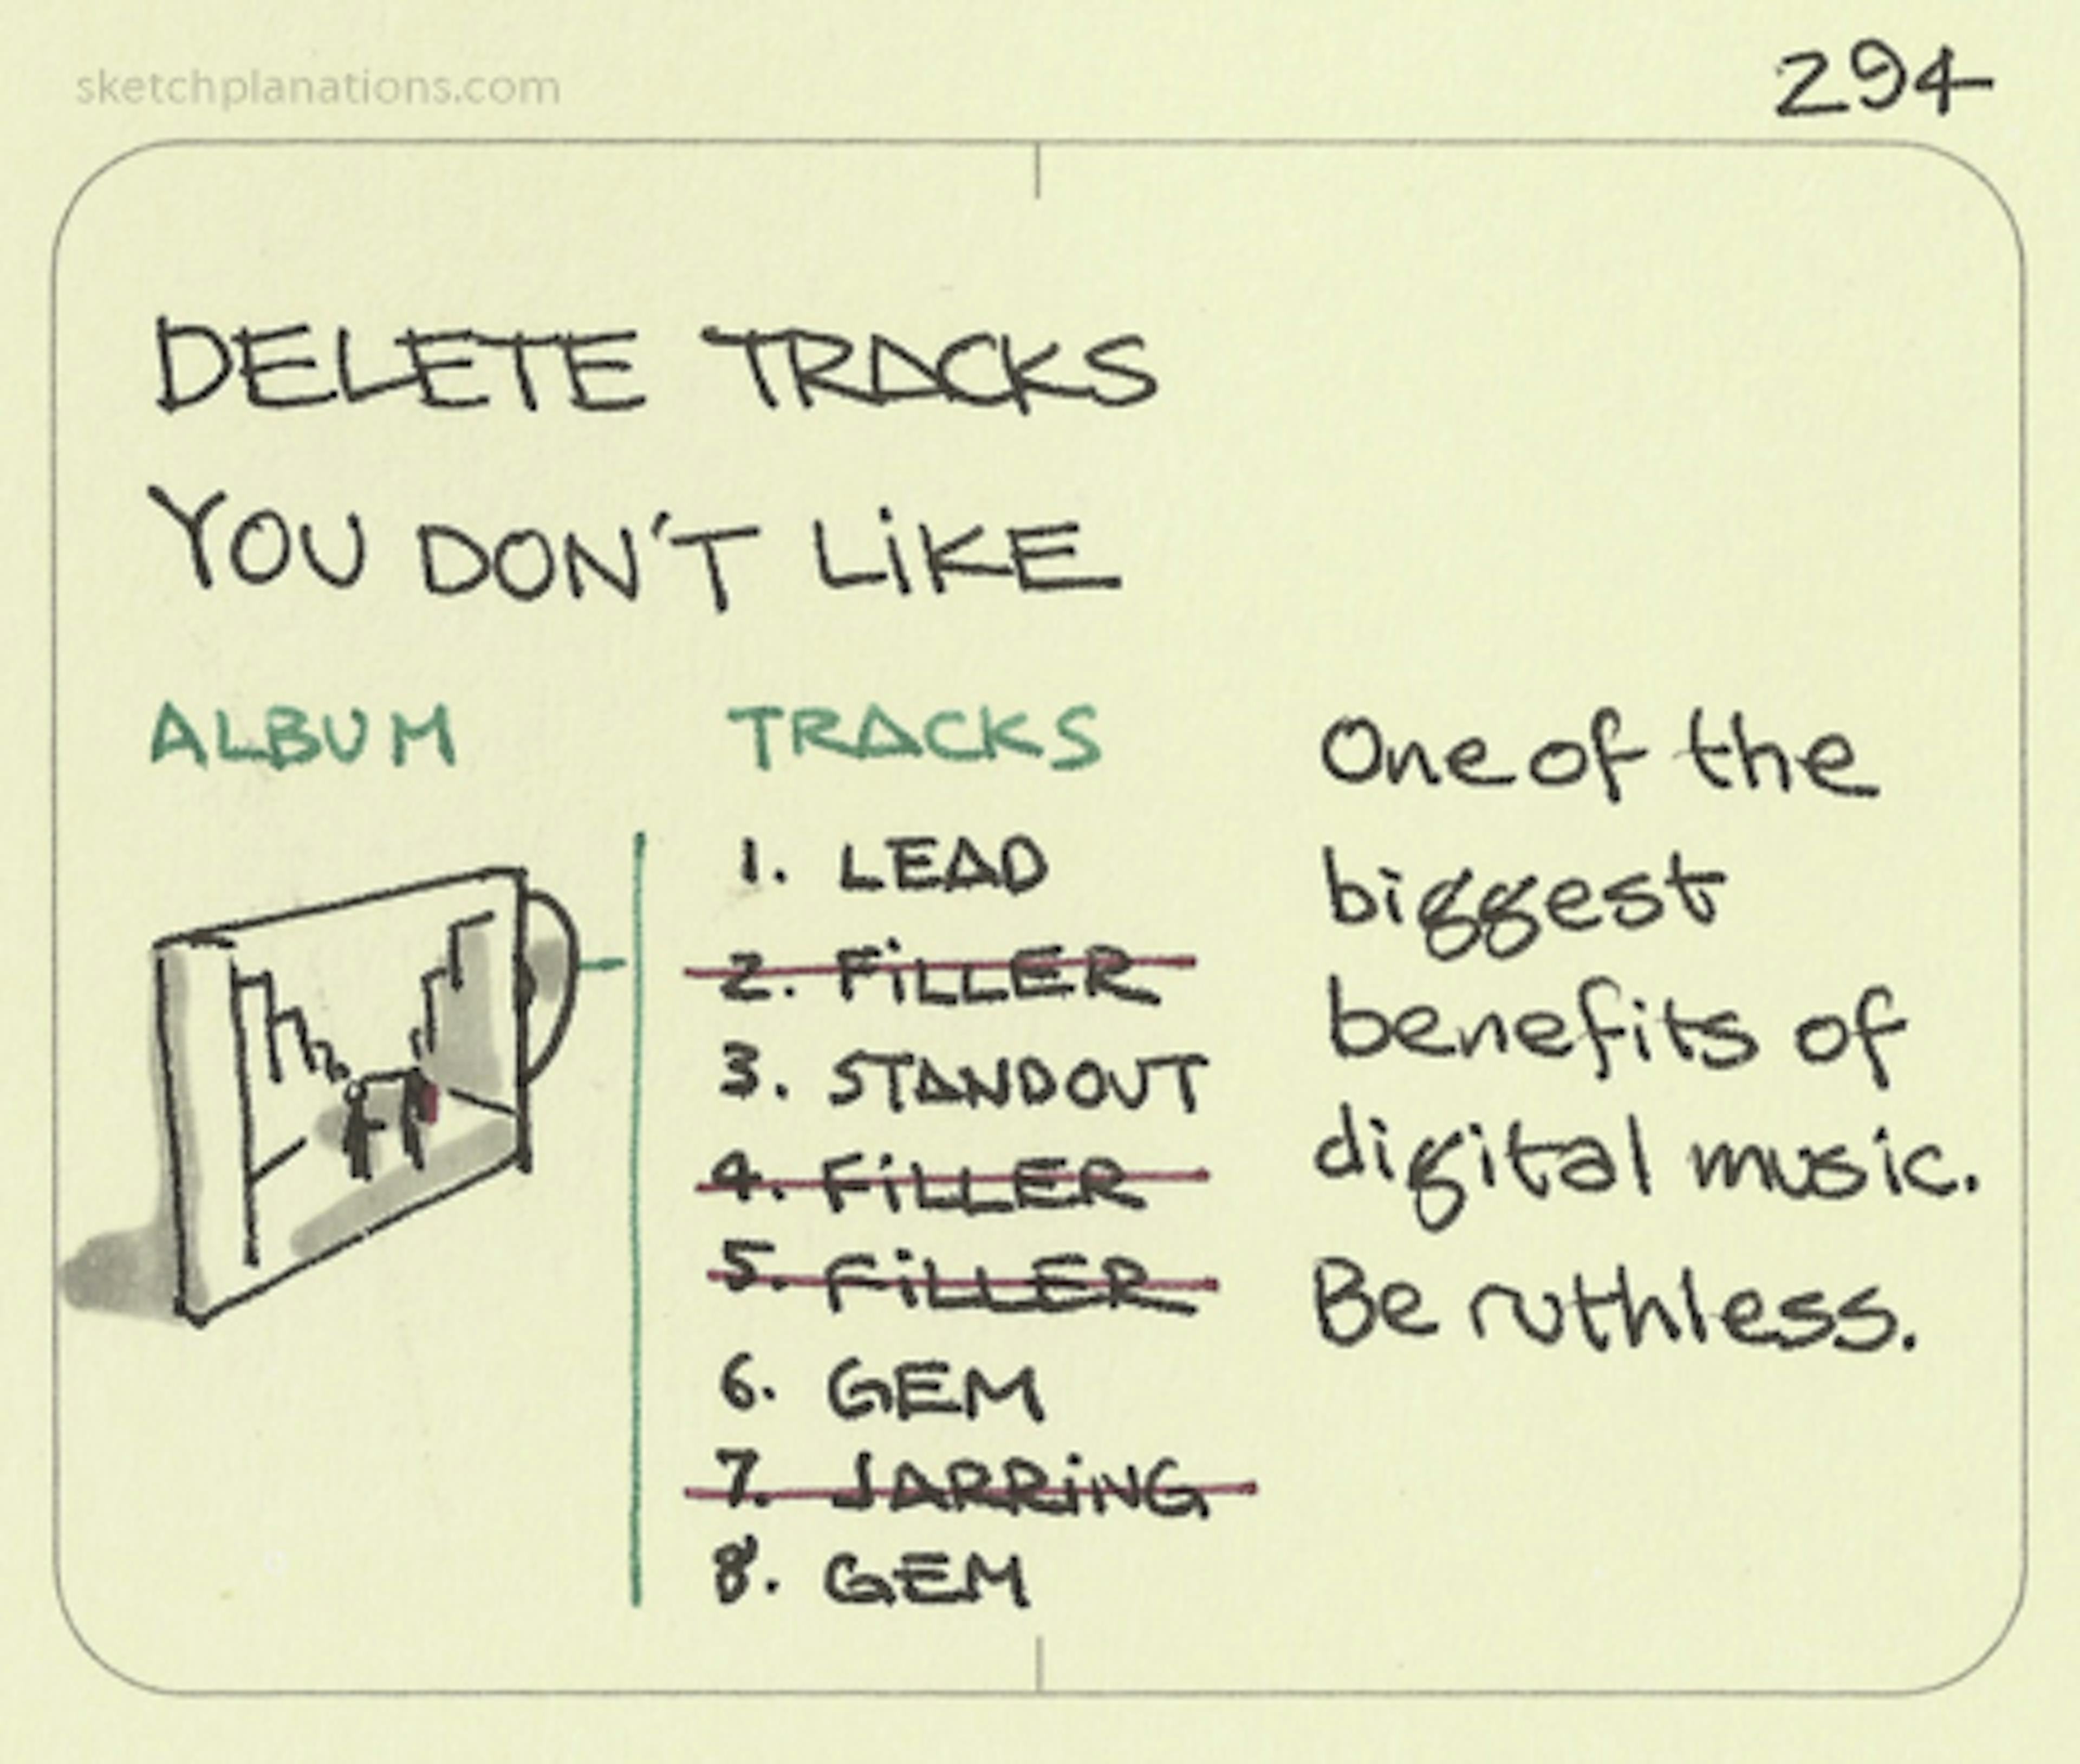 Delete tracks you don’t like - Sketchplanations